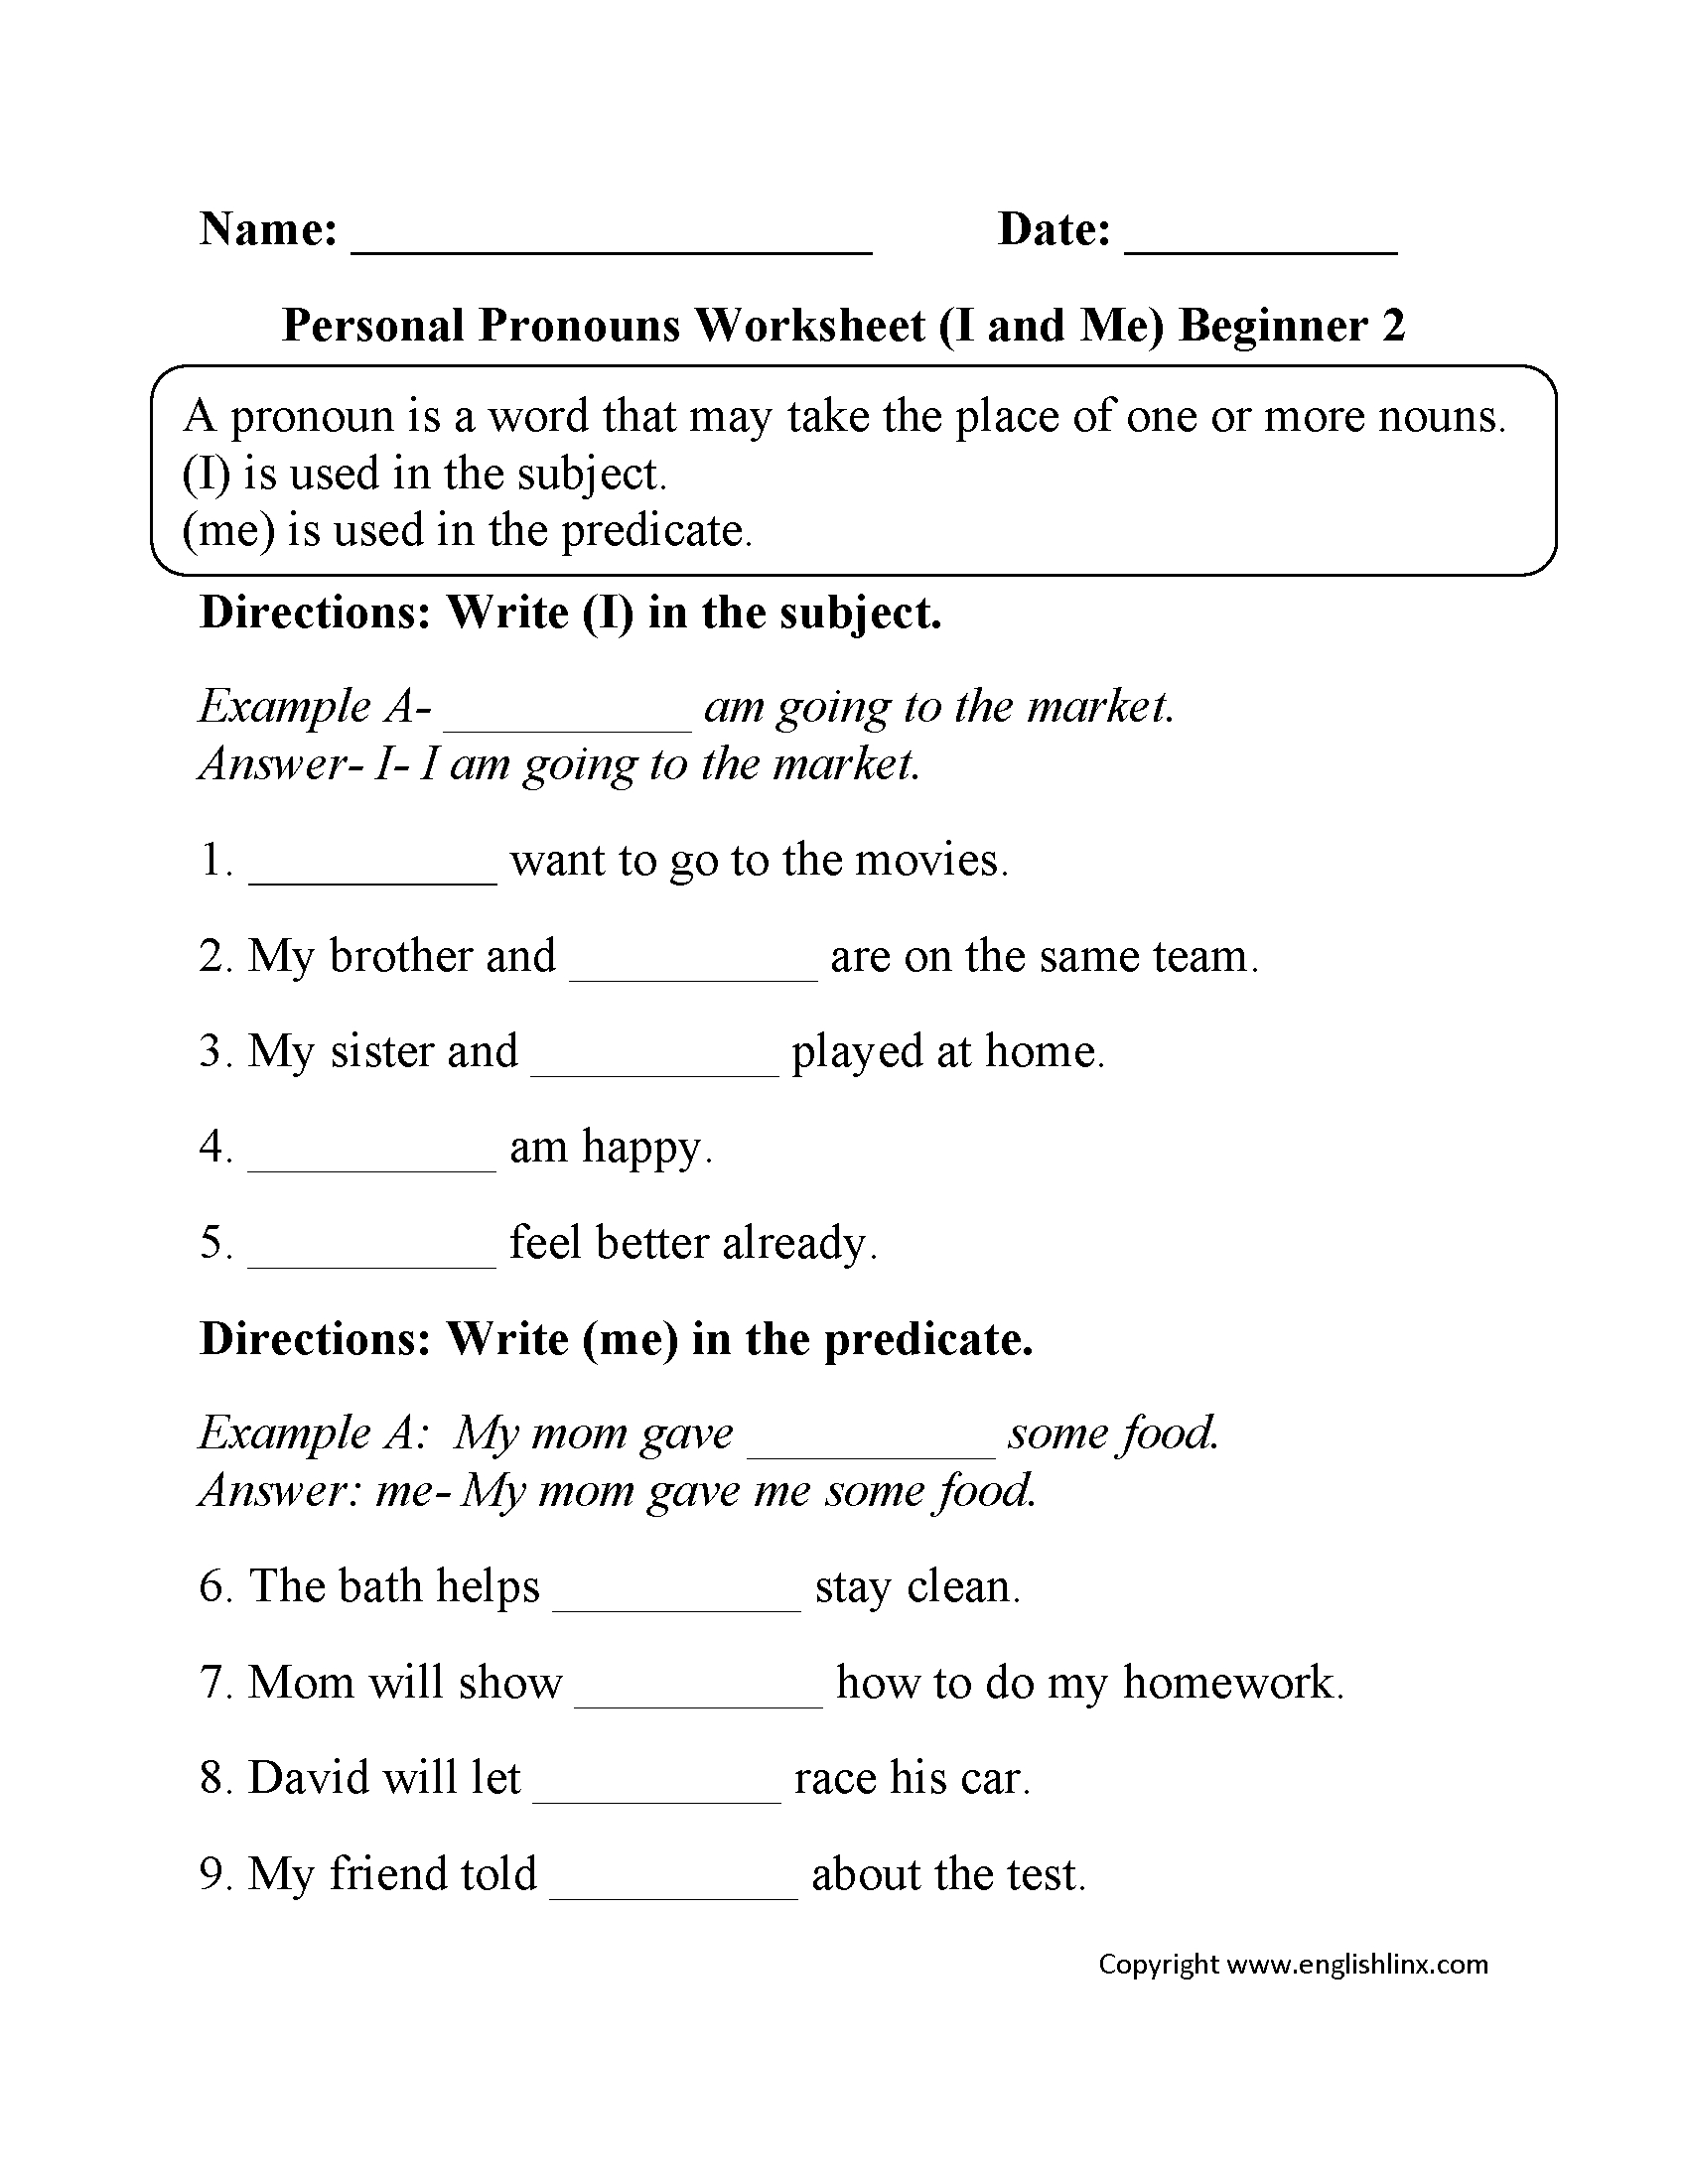 Personal Pronouns Worksheets  I And Me Personal Pronouns Worksheets Pertaining To Subject Pronoun Worksheets For Grade 2